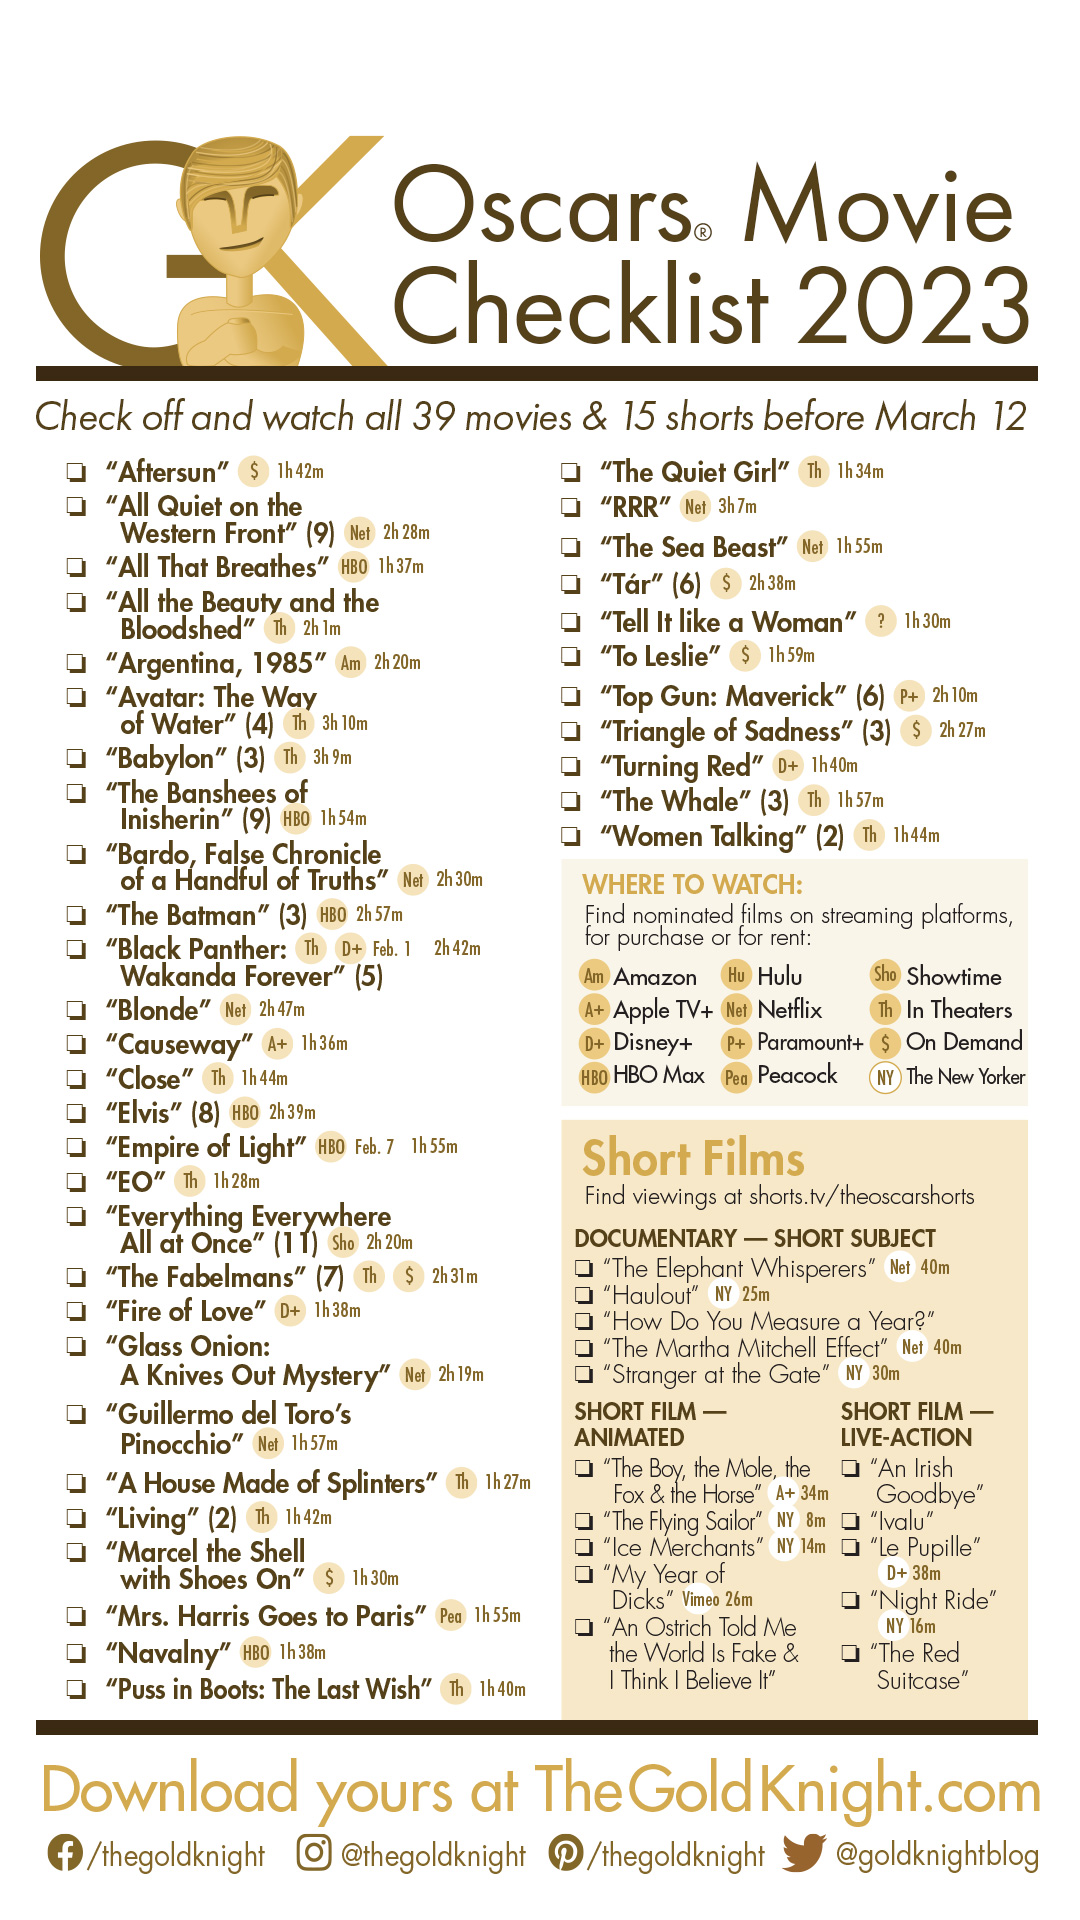 Oscars 2023 Download our printable movie checklist The Gold Knight